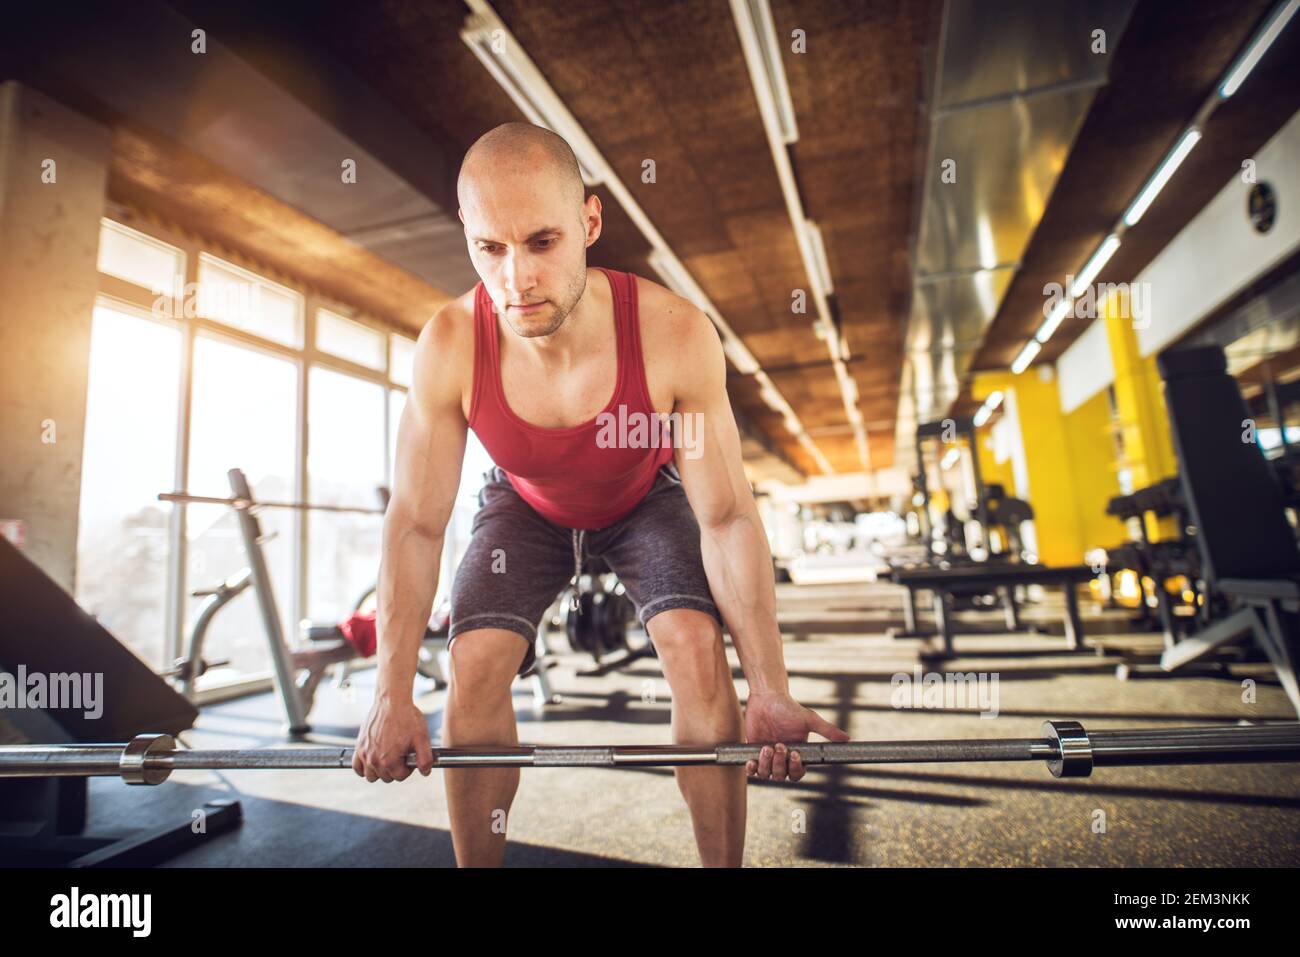 Young focused hardworking sporty fitness man crouching with barbell without weights and doing deadlifts in the gym. Stock Photo